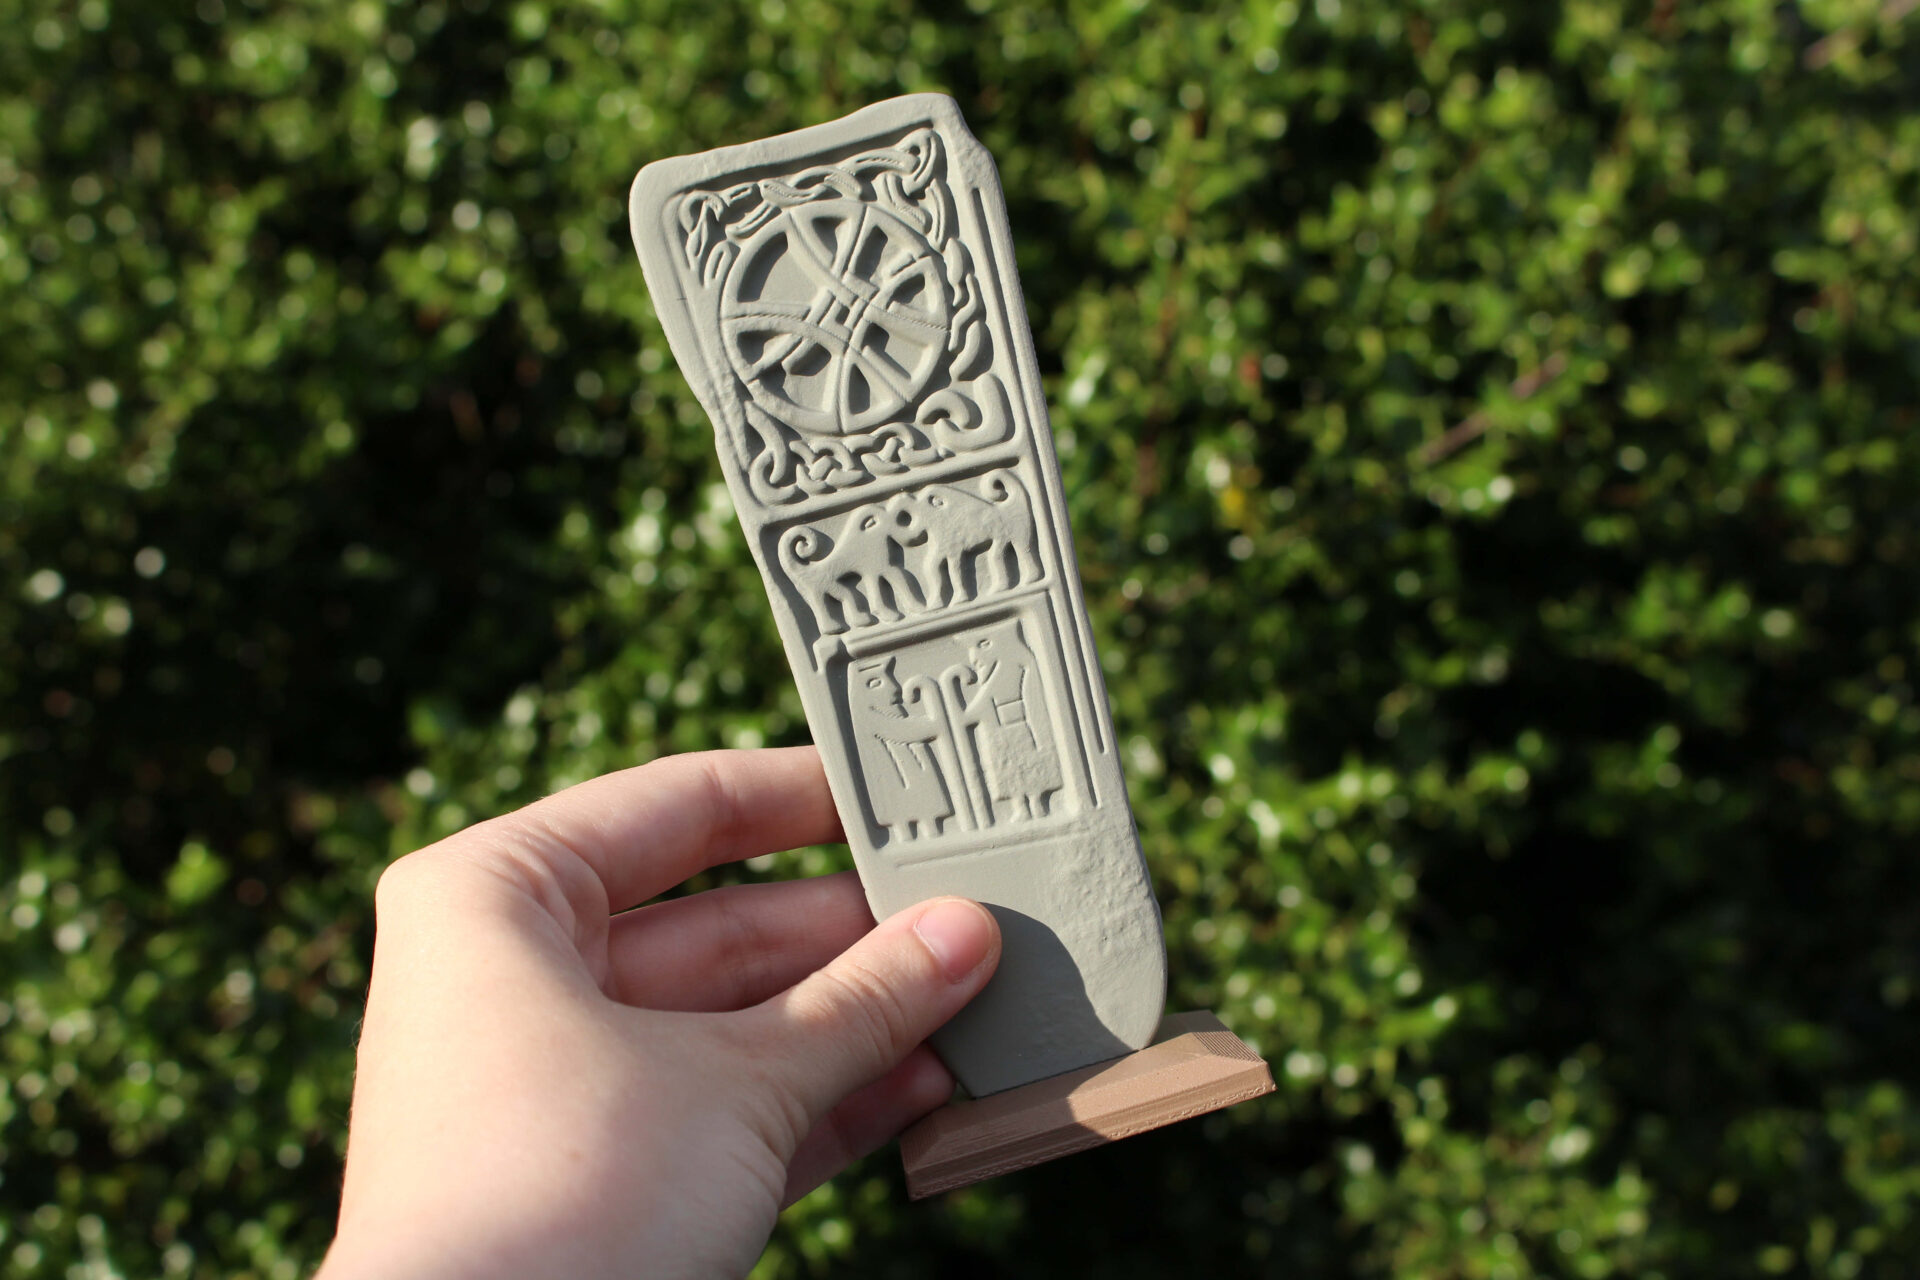 A hand holding a grey Pictish stone with symbols including a circle, interlace, two animals and bishops on a brown wooden base with greenery in the background.